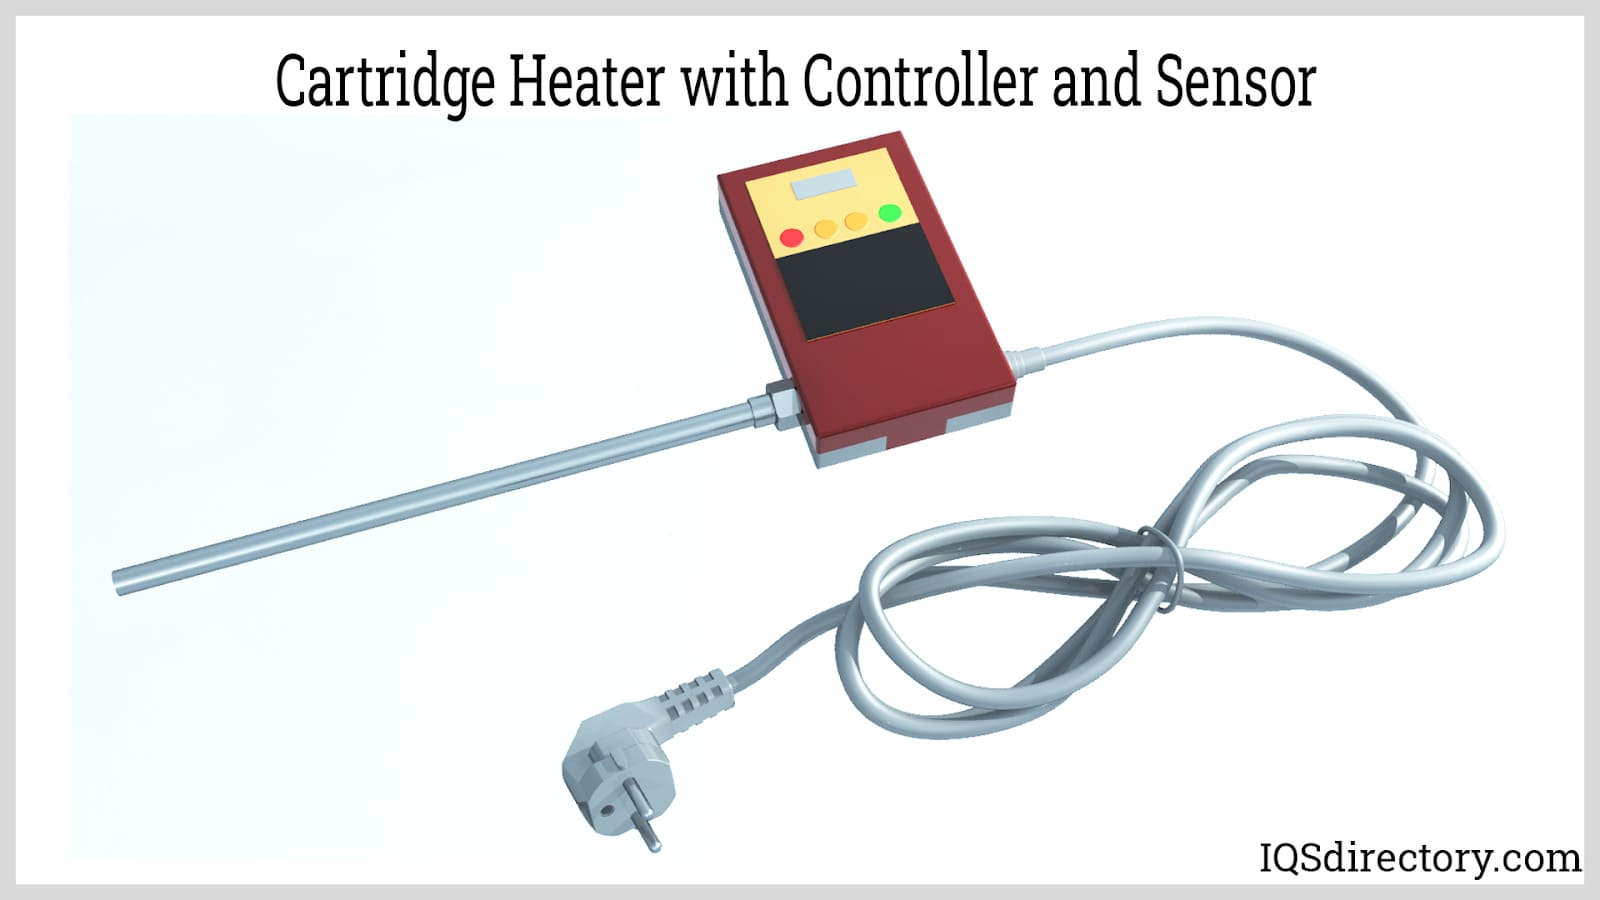 Cartridge Heater with Controller and Sensor